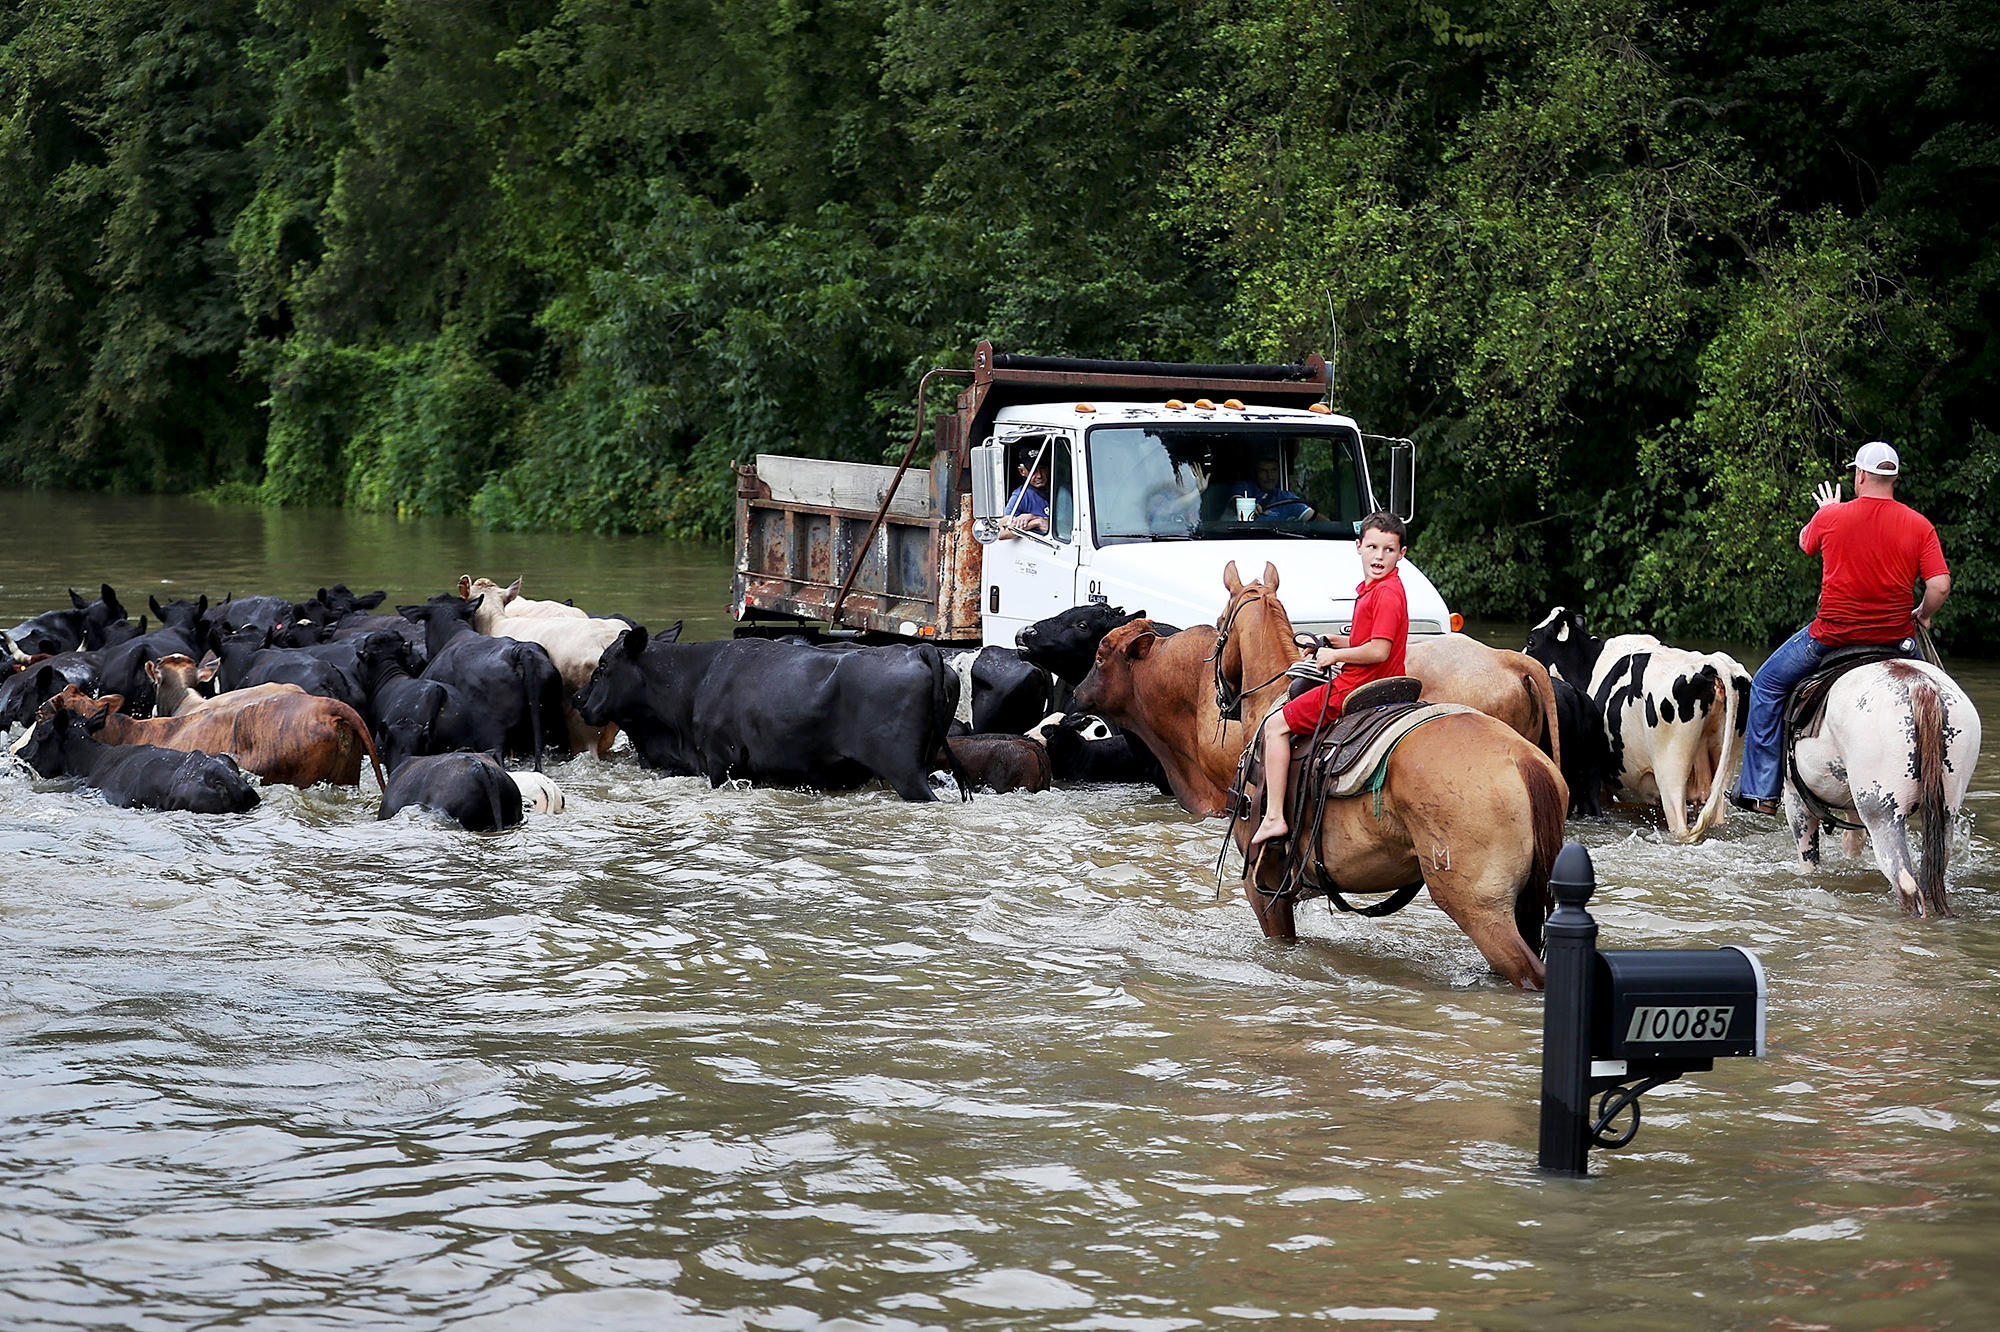 Cattle had to be driven through the waters of a flooded road, and then trucked to higher ground on Aug. 16, in Sorrento, La. About a third of the flooding in the state last month occurred outside the local flood plain. (Photo by Joe Raedle/Getty Images)